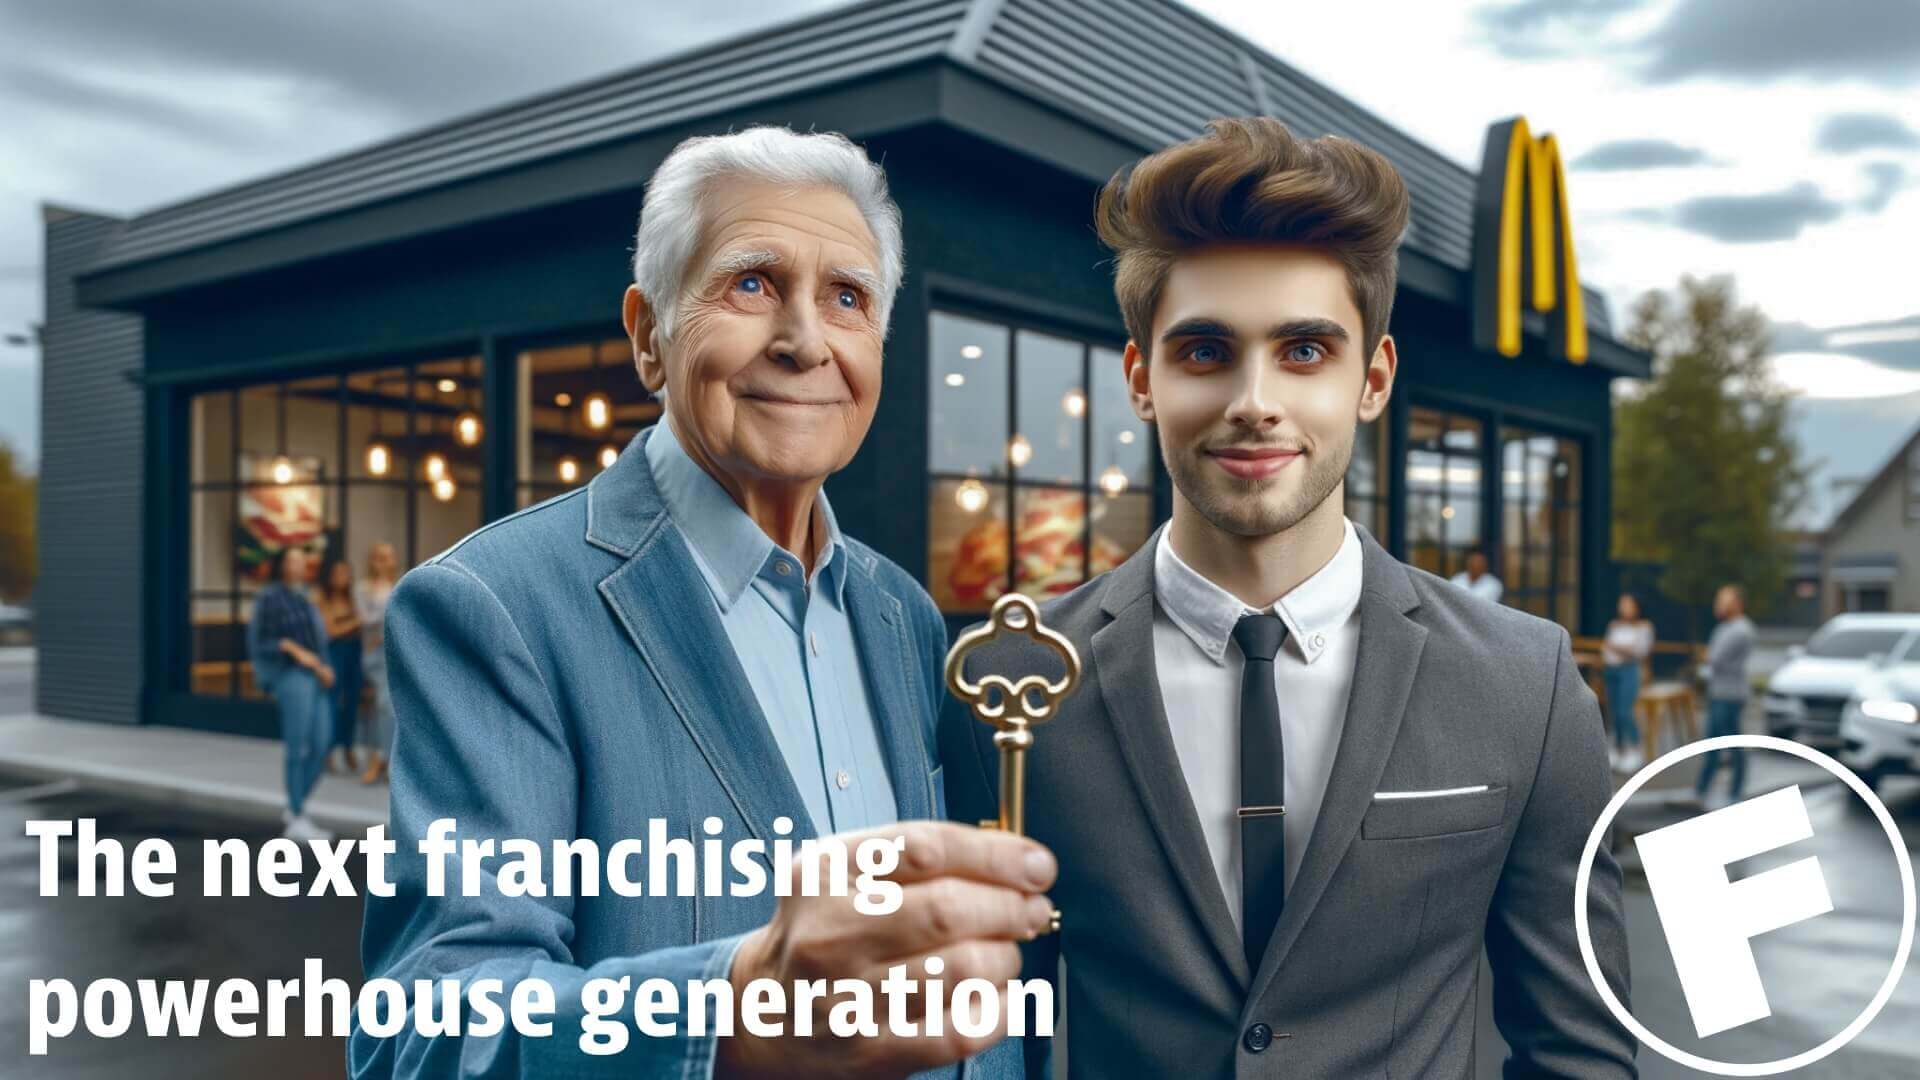 a retiring baby boomer franchisee passing his mcdonald's key to the new millennial owner